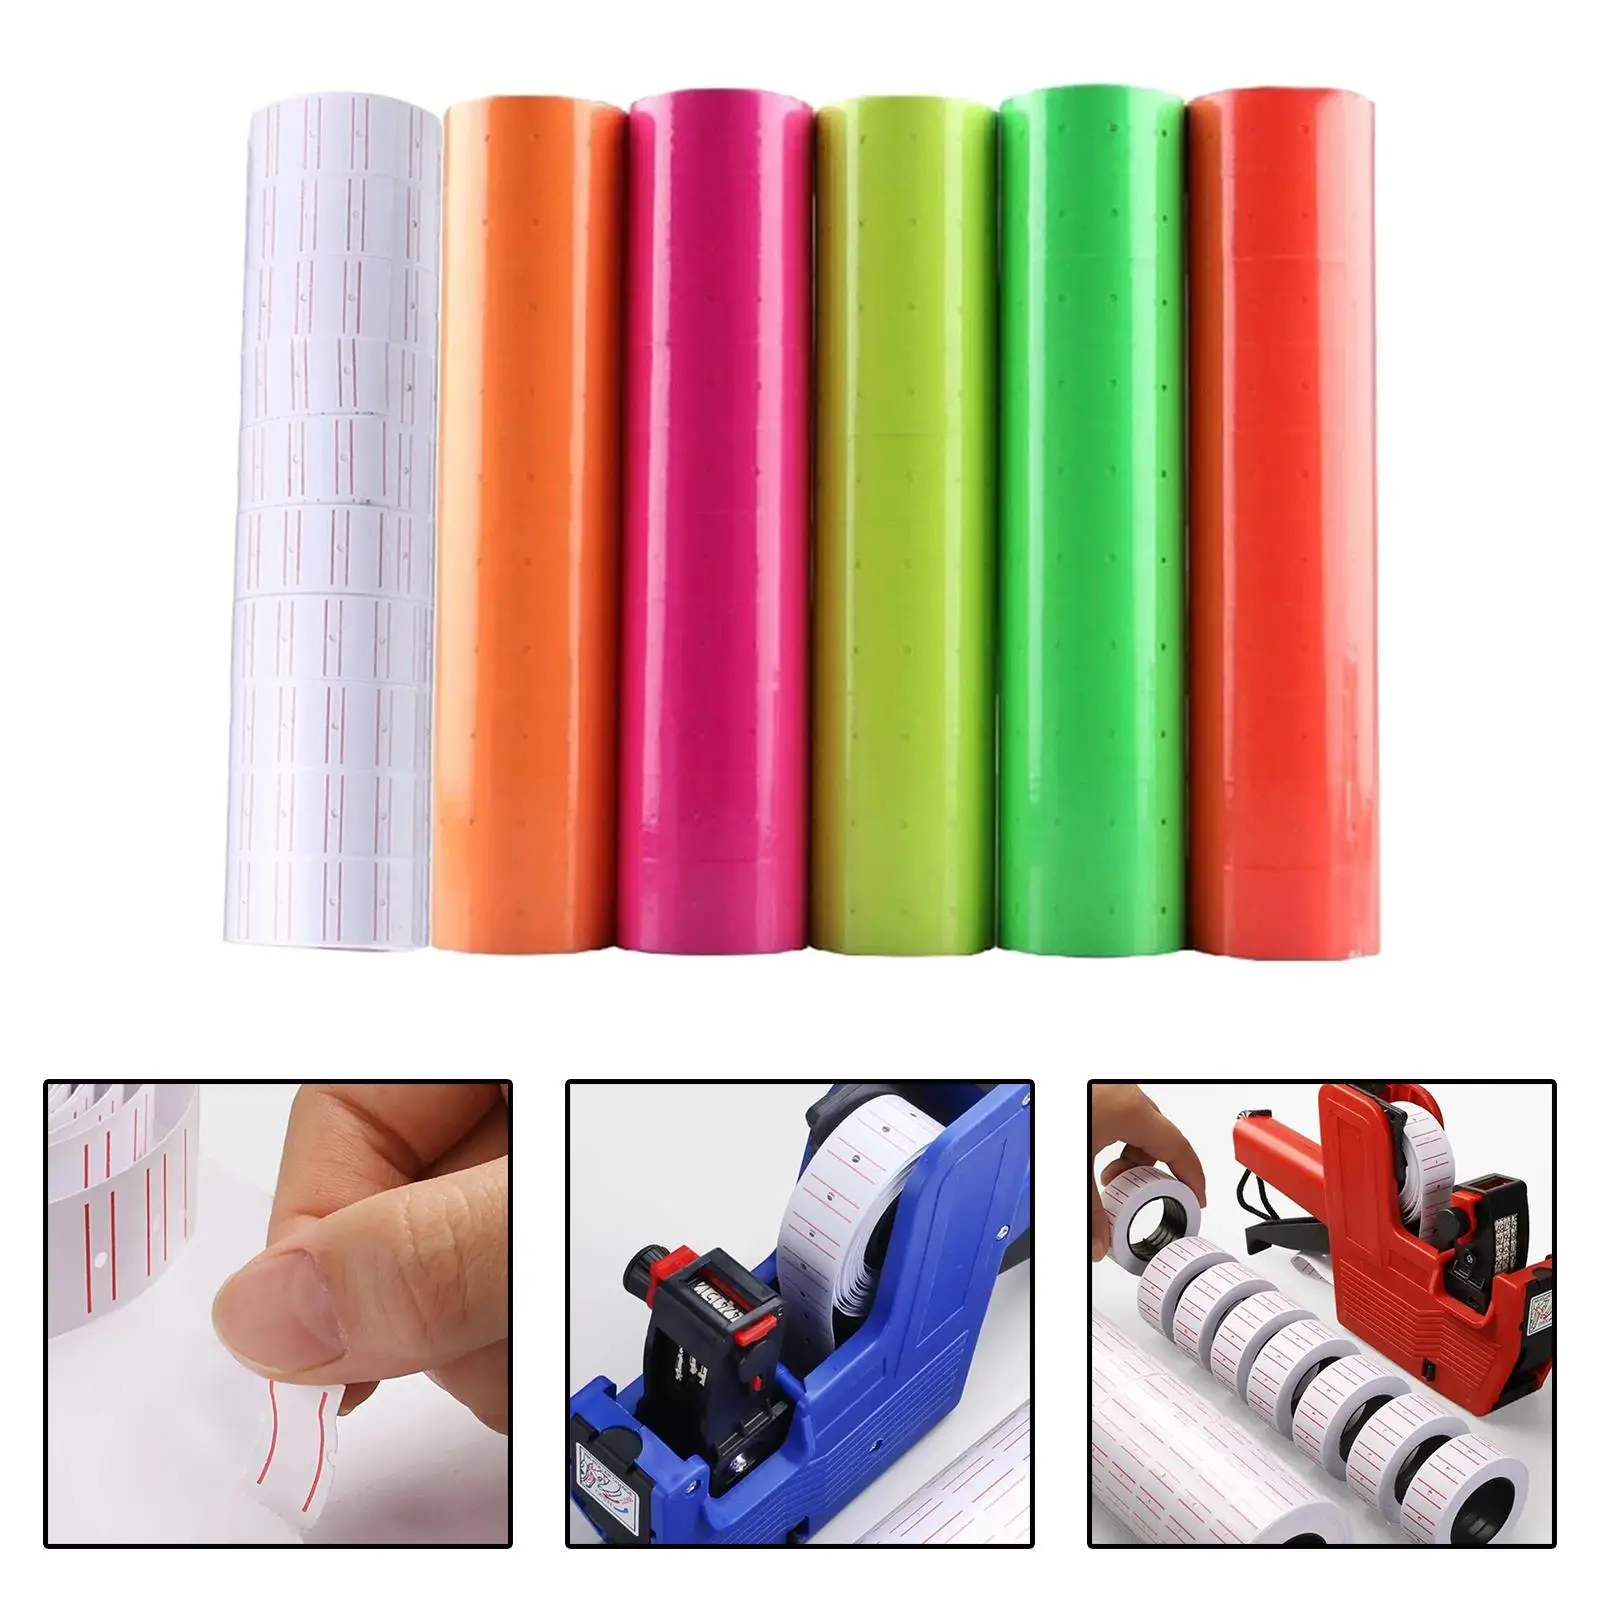 60 Pieces Tags Rolls Mixed Color Tagging Supplies Tear Resistant Label Price Paper for Supermarkets Stores Use Retail Businesses